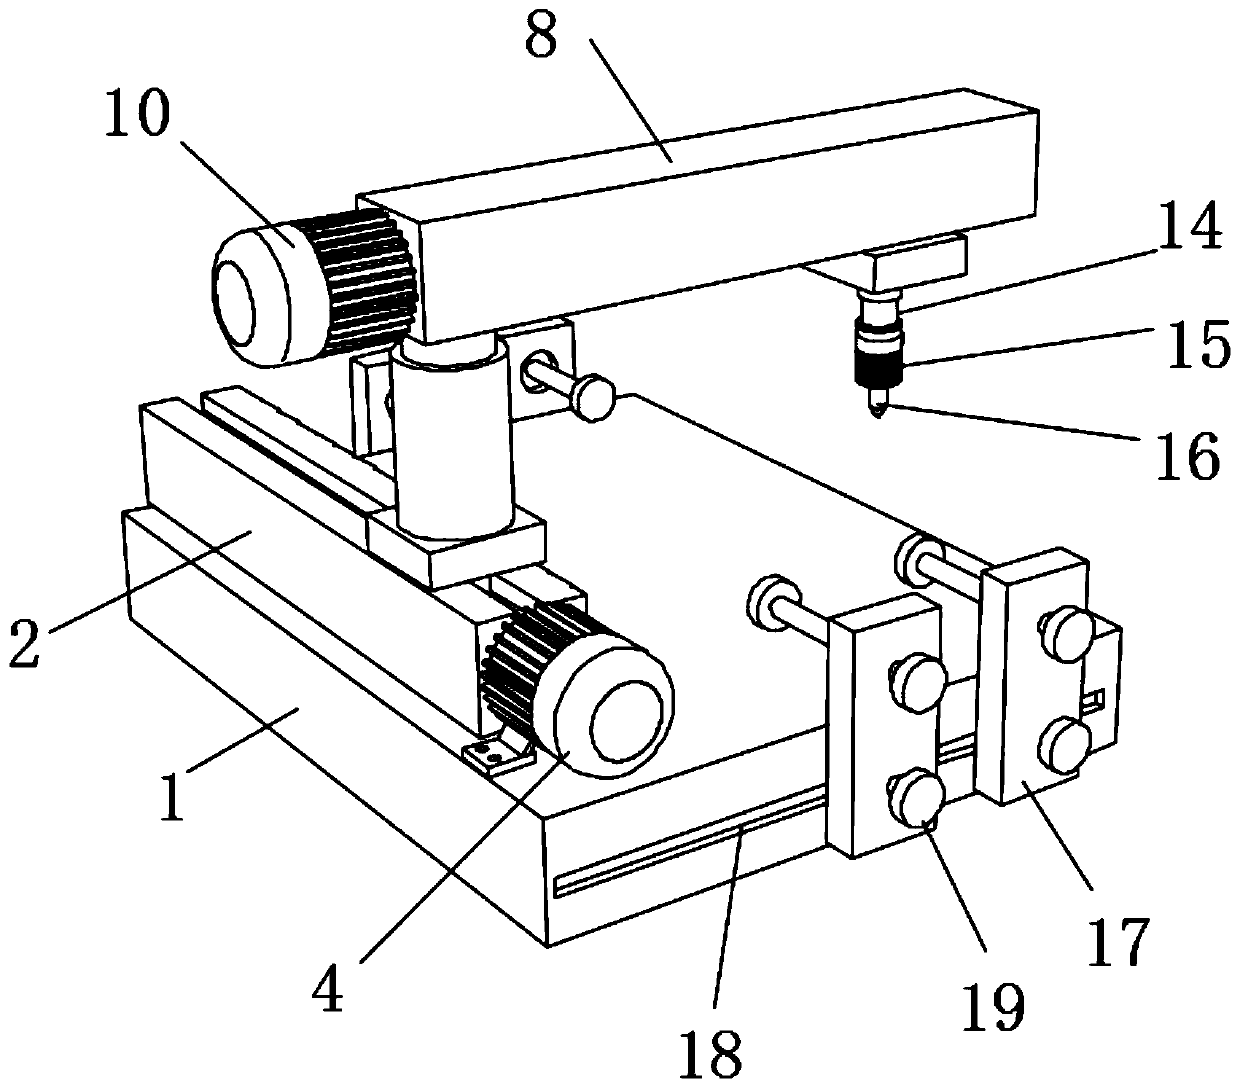 Perforating device for electric power fitting